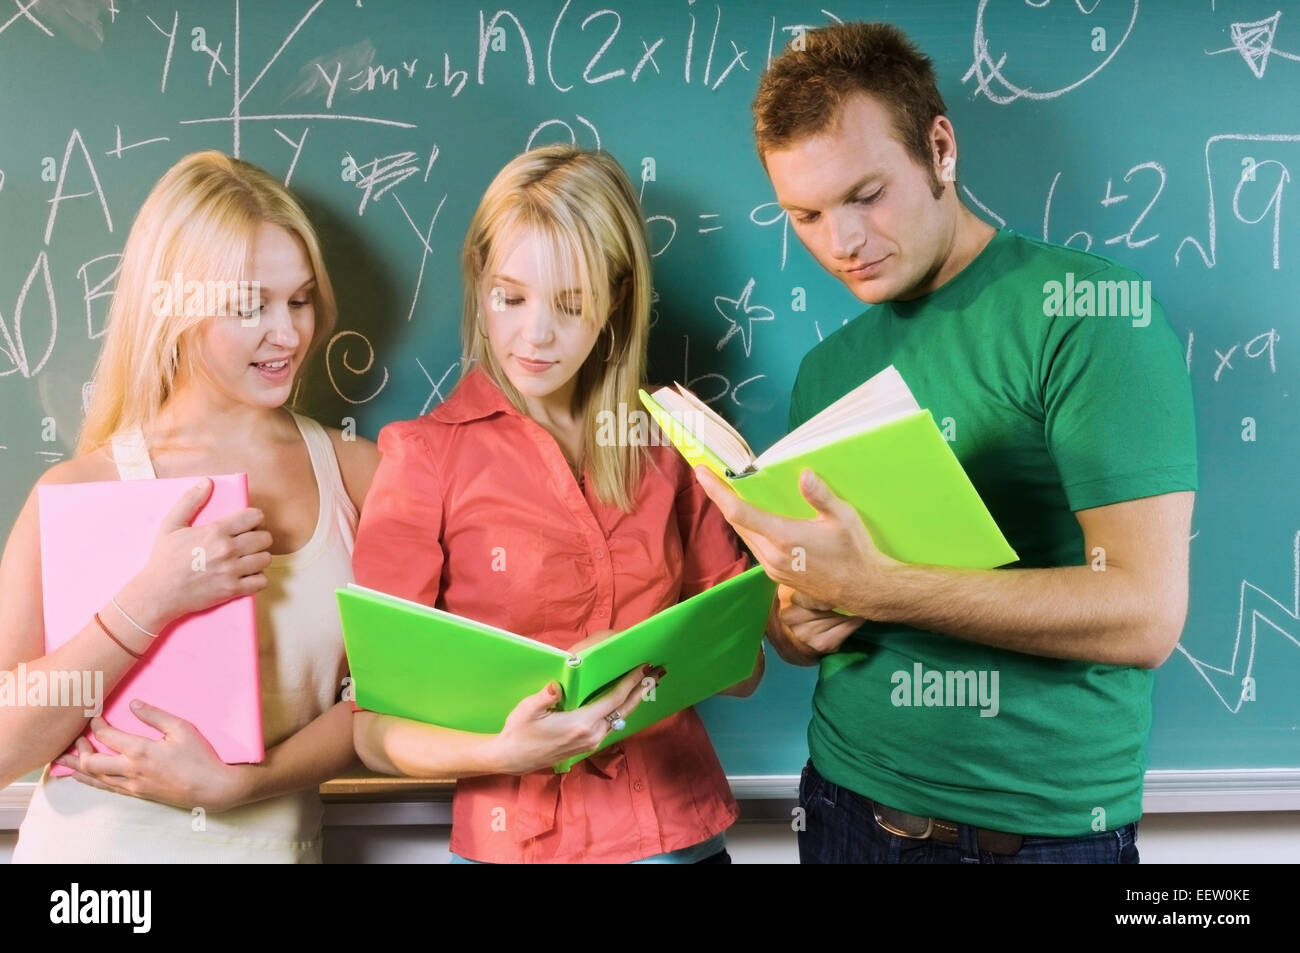 Three college students by a chalkboard Stock Photo